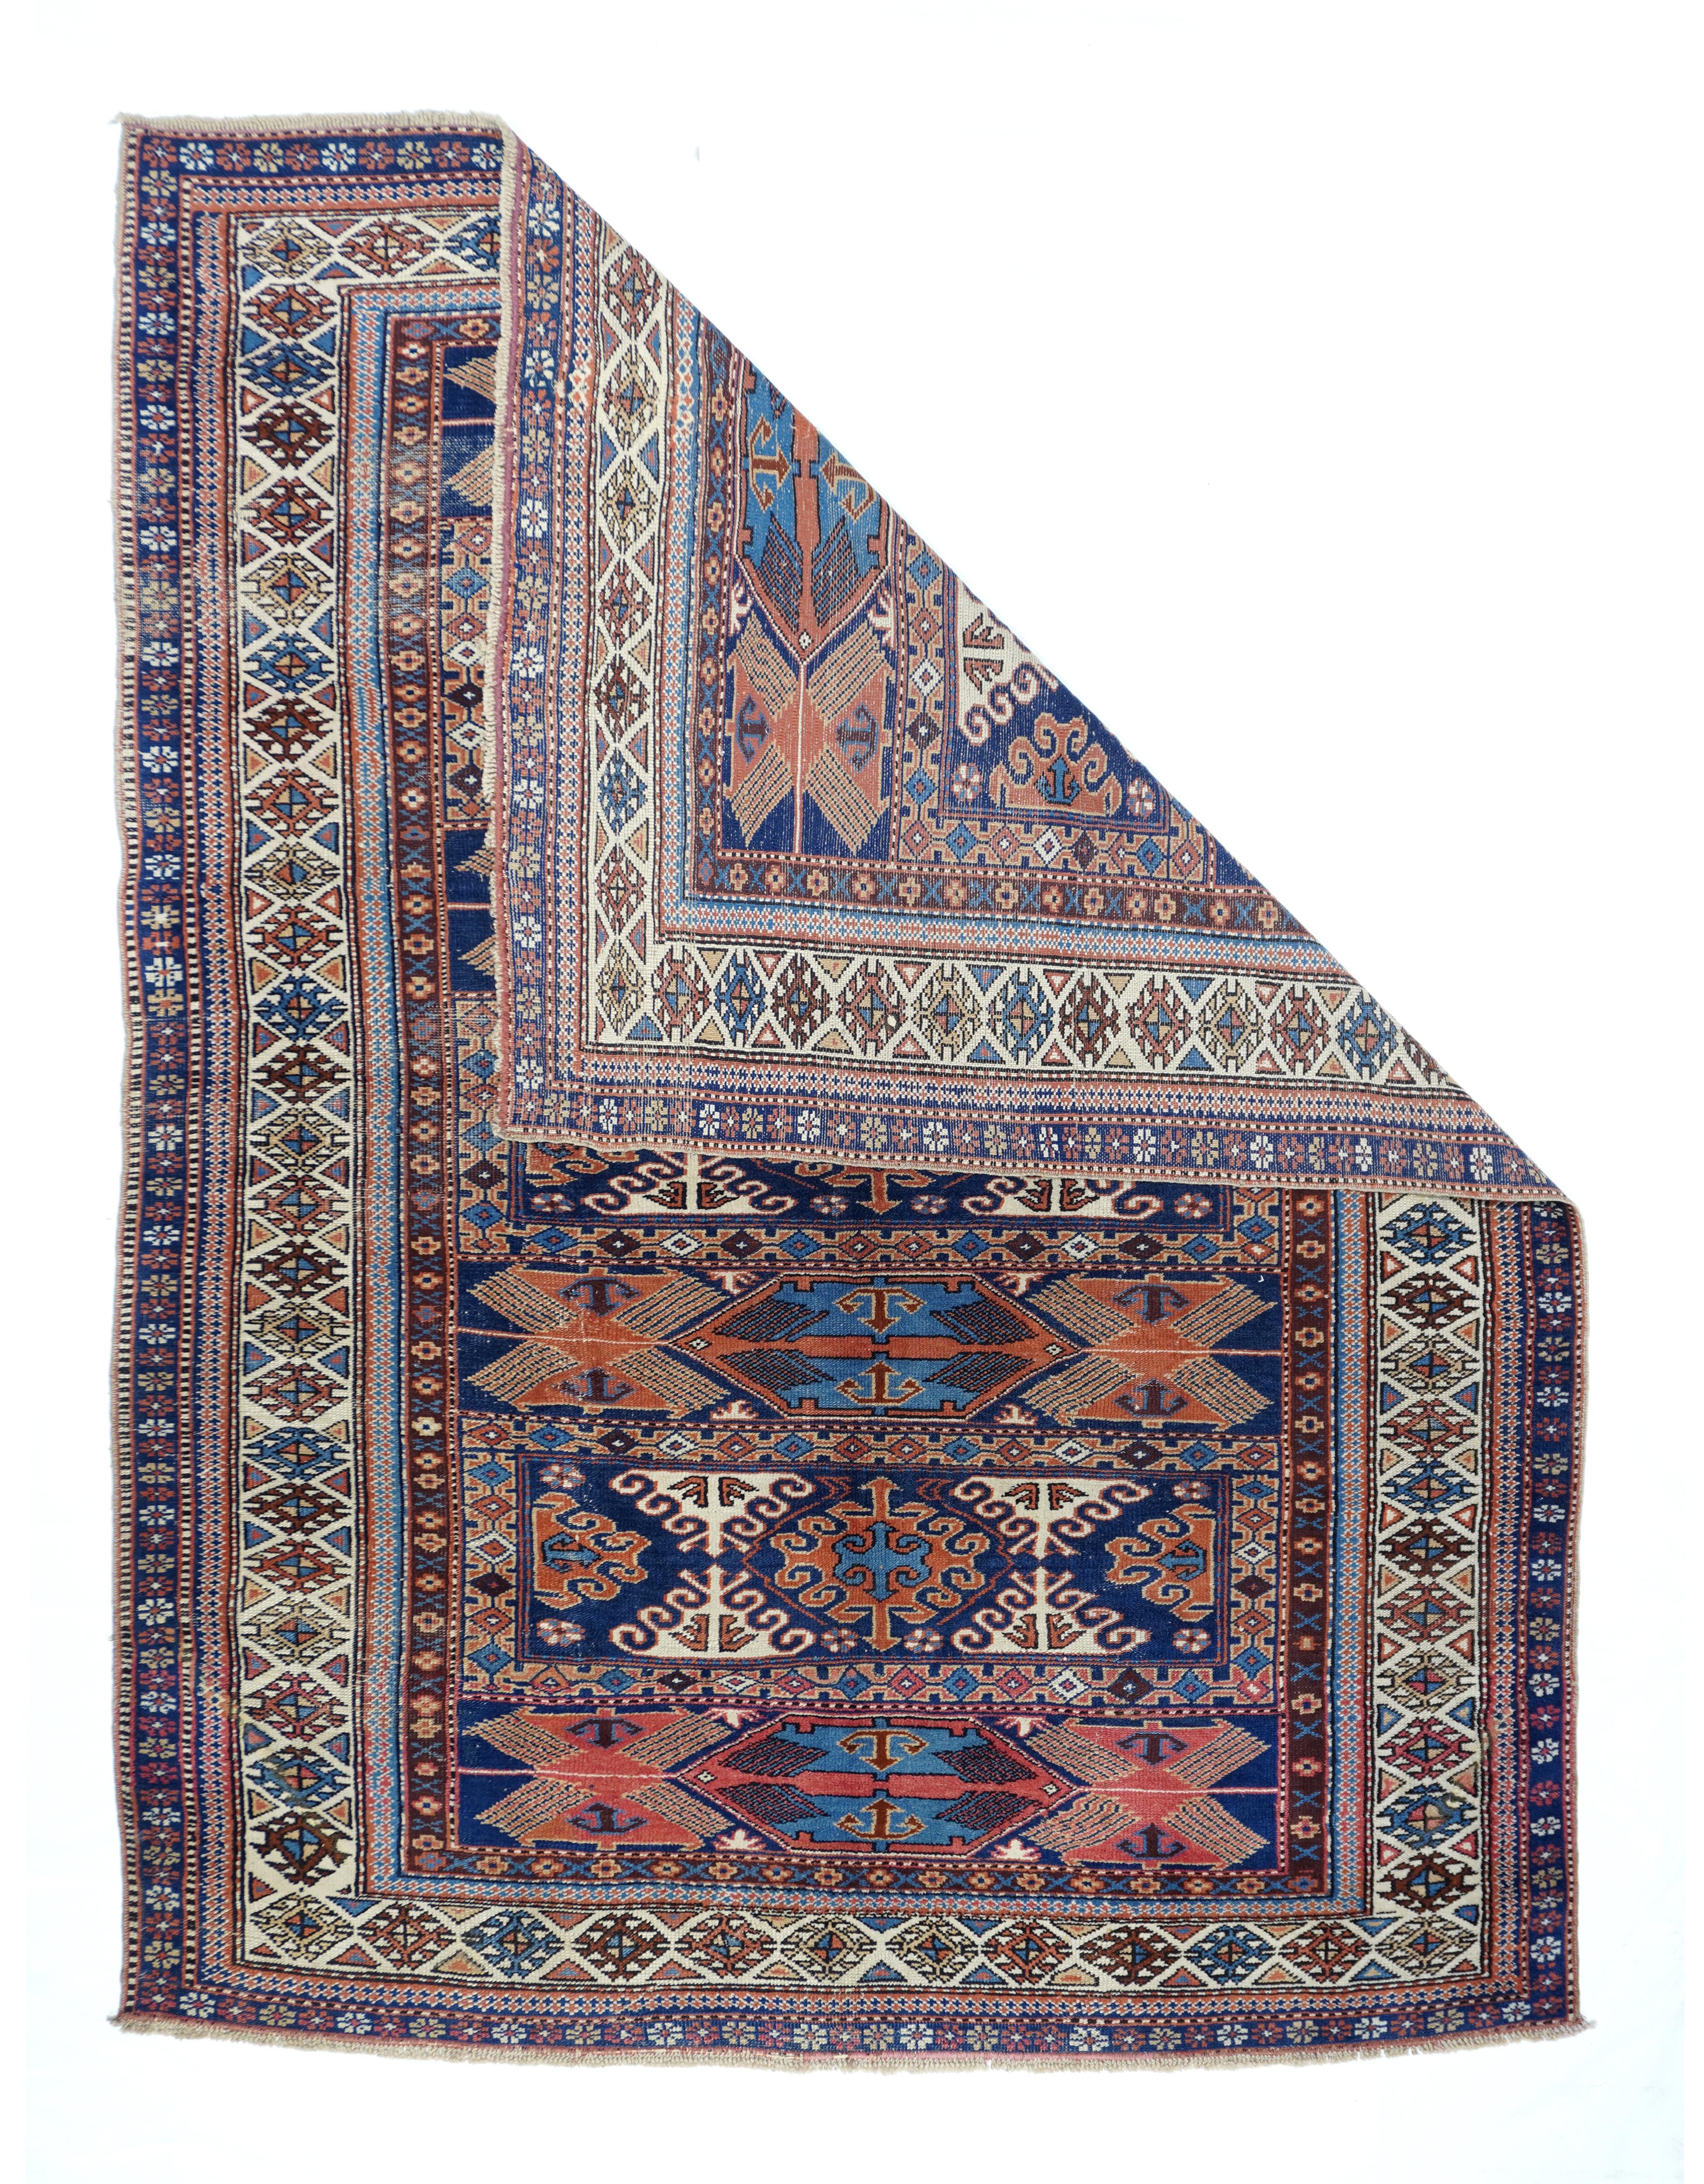 Antique Kazak rug 5'5'' x 7'5''. Antique Russian Kazak Wool on Wool 5'5'' x 7'5''. This very rare, probably east Caucasian/west Caspian, scatter in an enlarged soumak bag face design shows seven panels alternating with curly hooked lozenges and